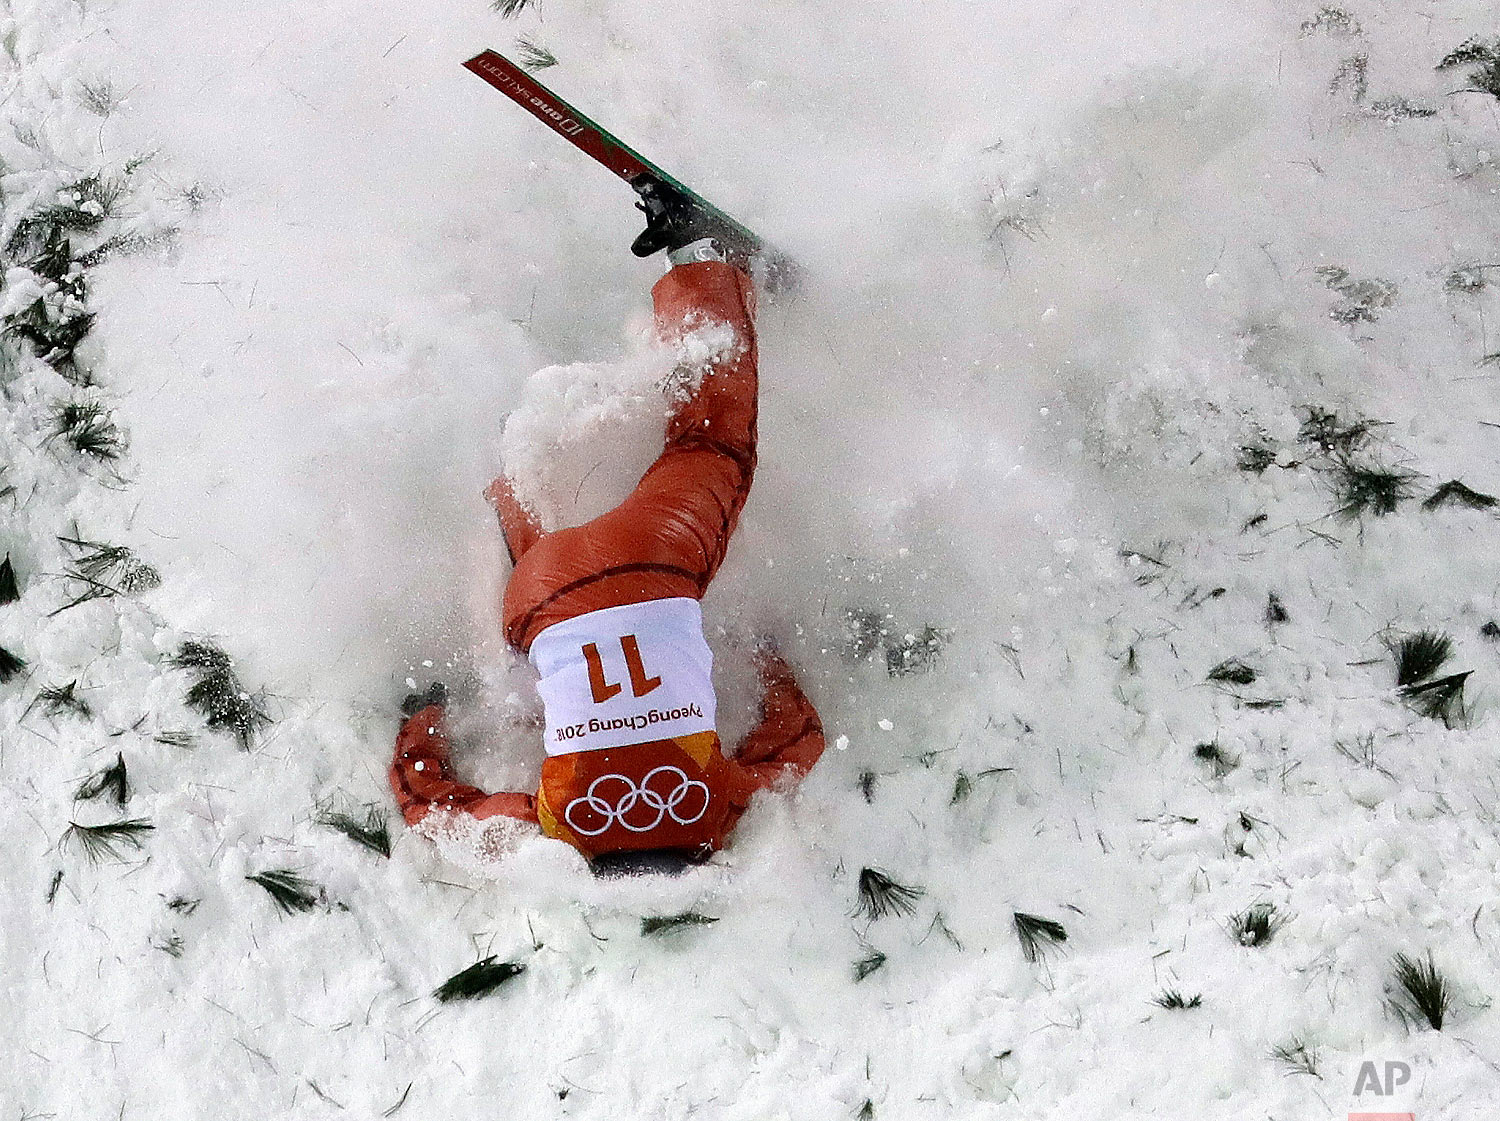  Alla Tsuper, of Belarus, crashes during the women's freestyle aerial final at Phoenix Snow Park at the 2018 Winter Olympics in Pyeongchang, South Korea, Friday, Feb. 16, 2018. (AP Photo/Lee Jin-man) 